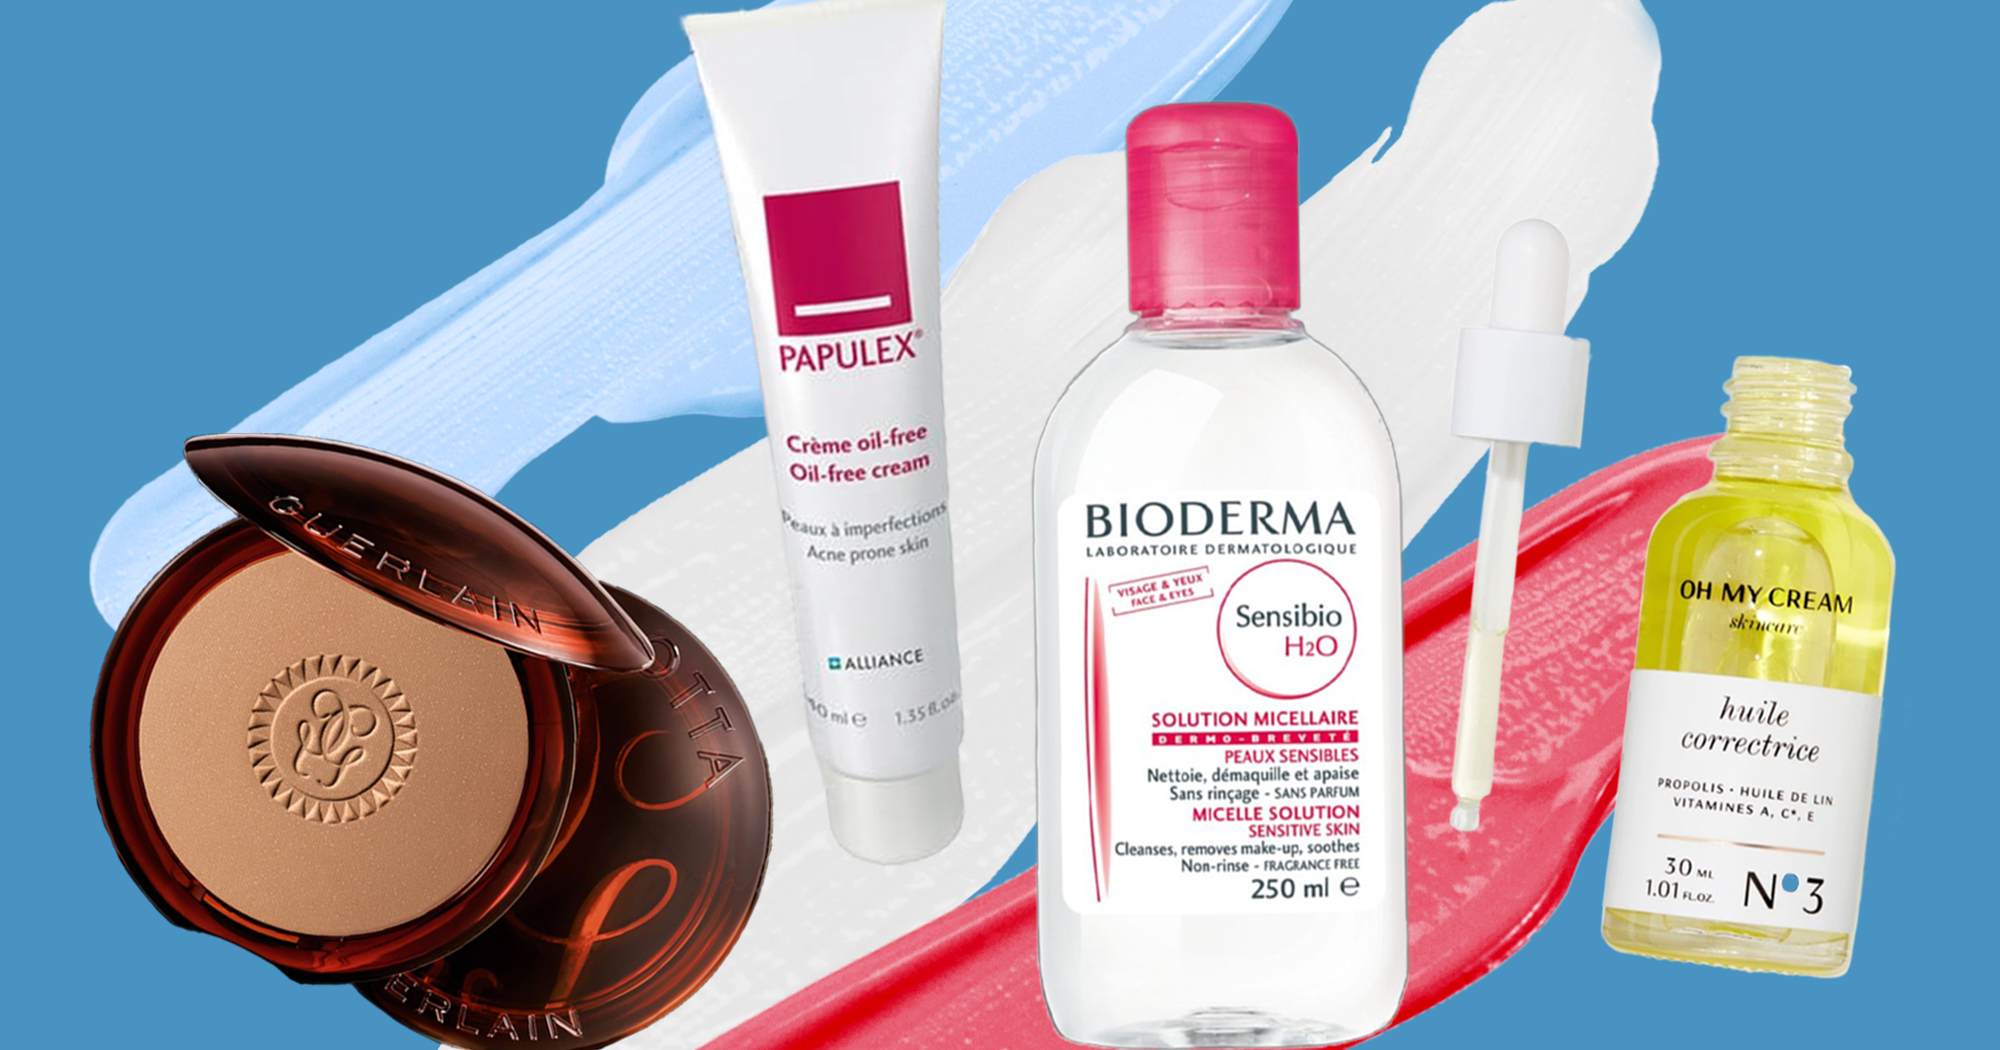 7 French Beauty Products For Beautiful Skin - The Reluctant Parisian